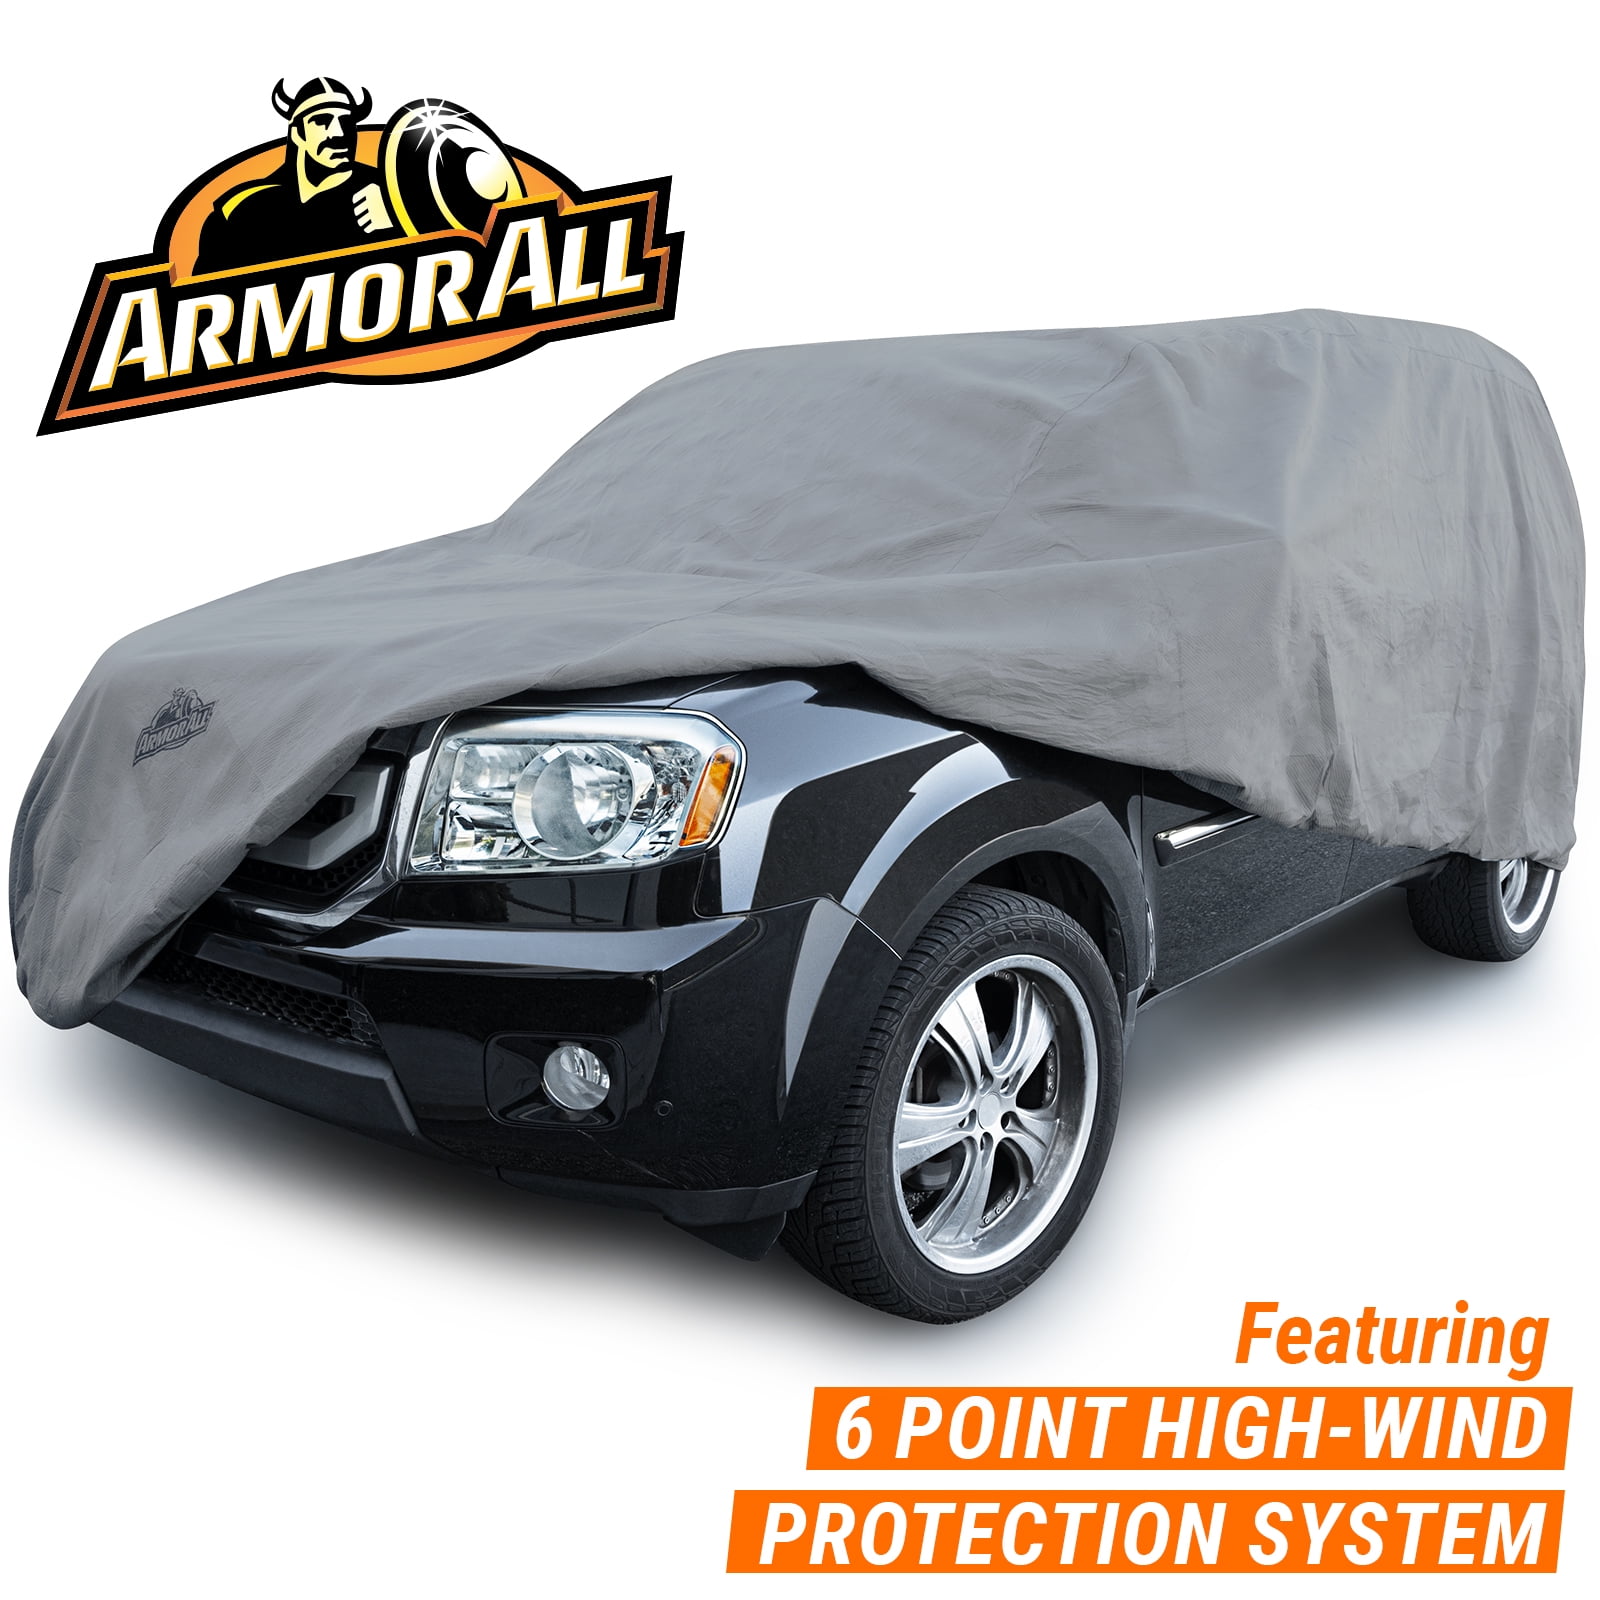 Armor All SUV Cover, Heavy Duty All Weather Protection, Fits SUVs Length up  to 205\